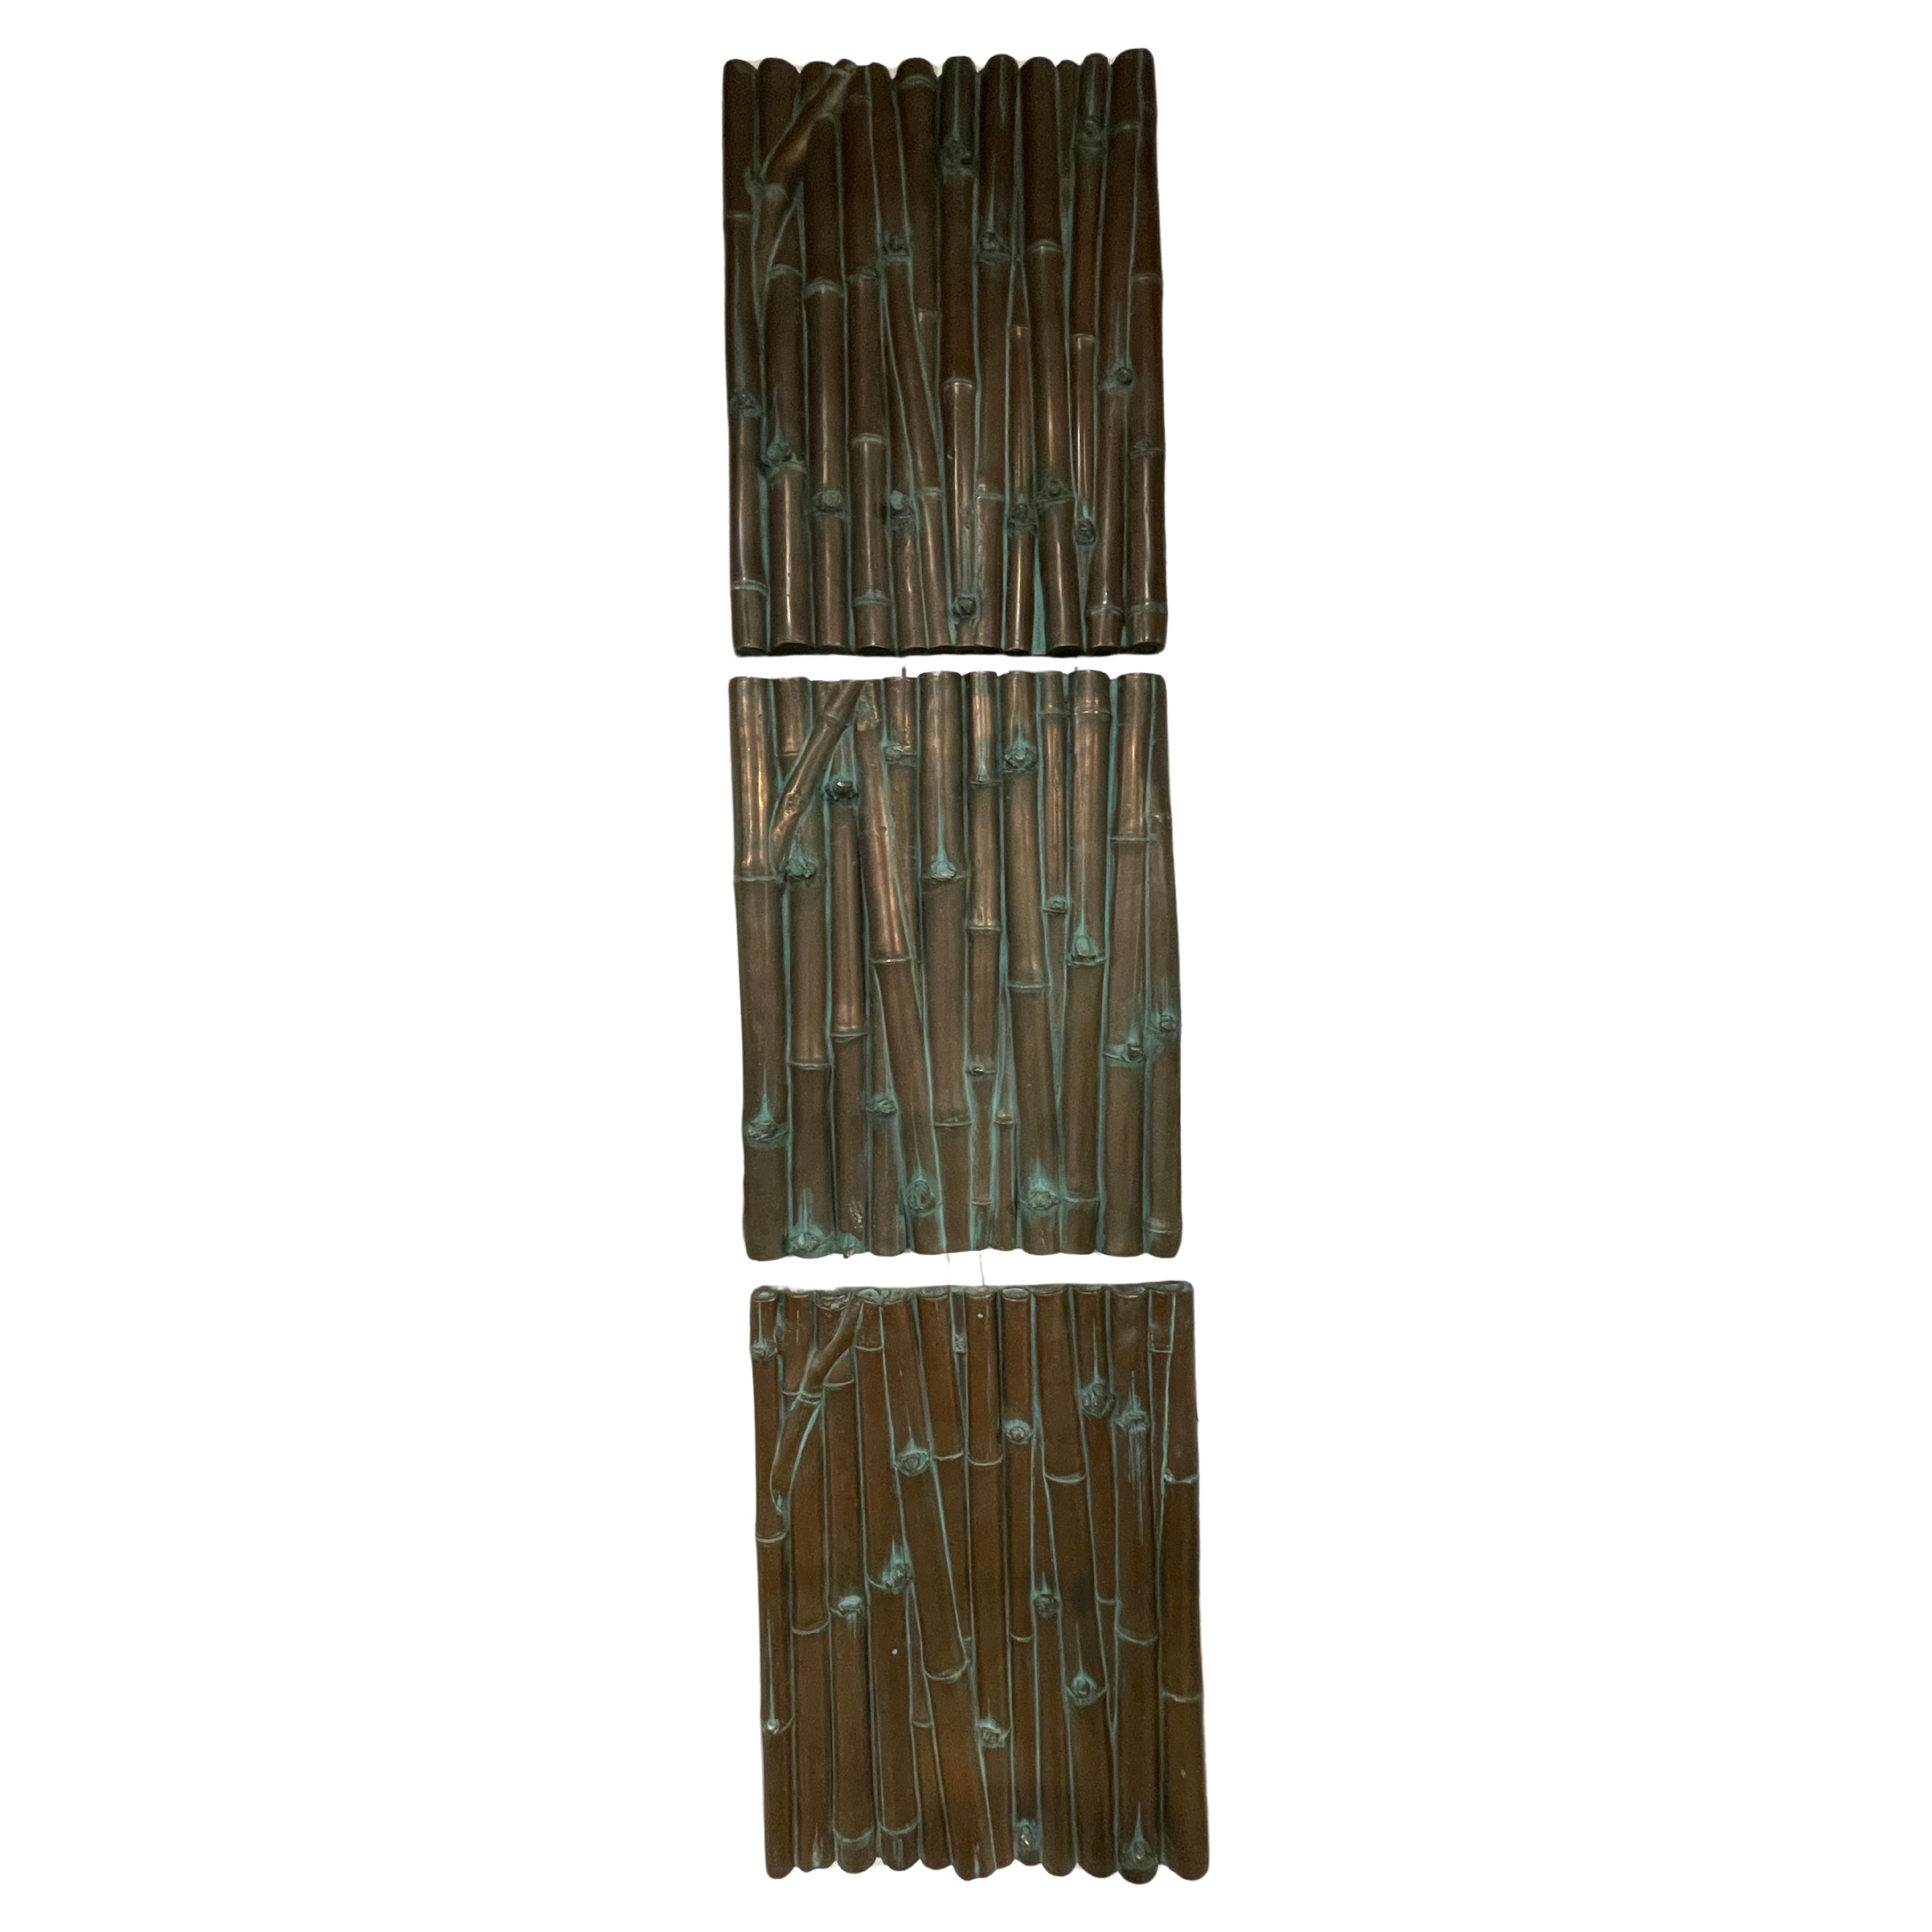 Three Bronze Clad Bamboo Relief Wall Panel Sculptures For Sale